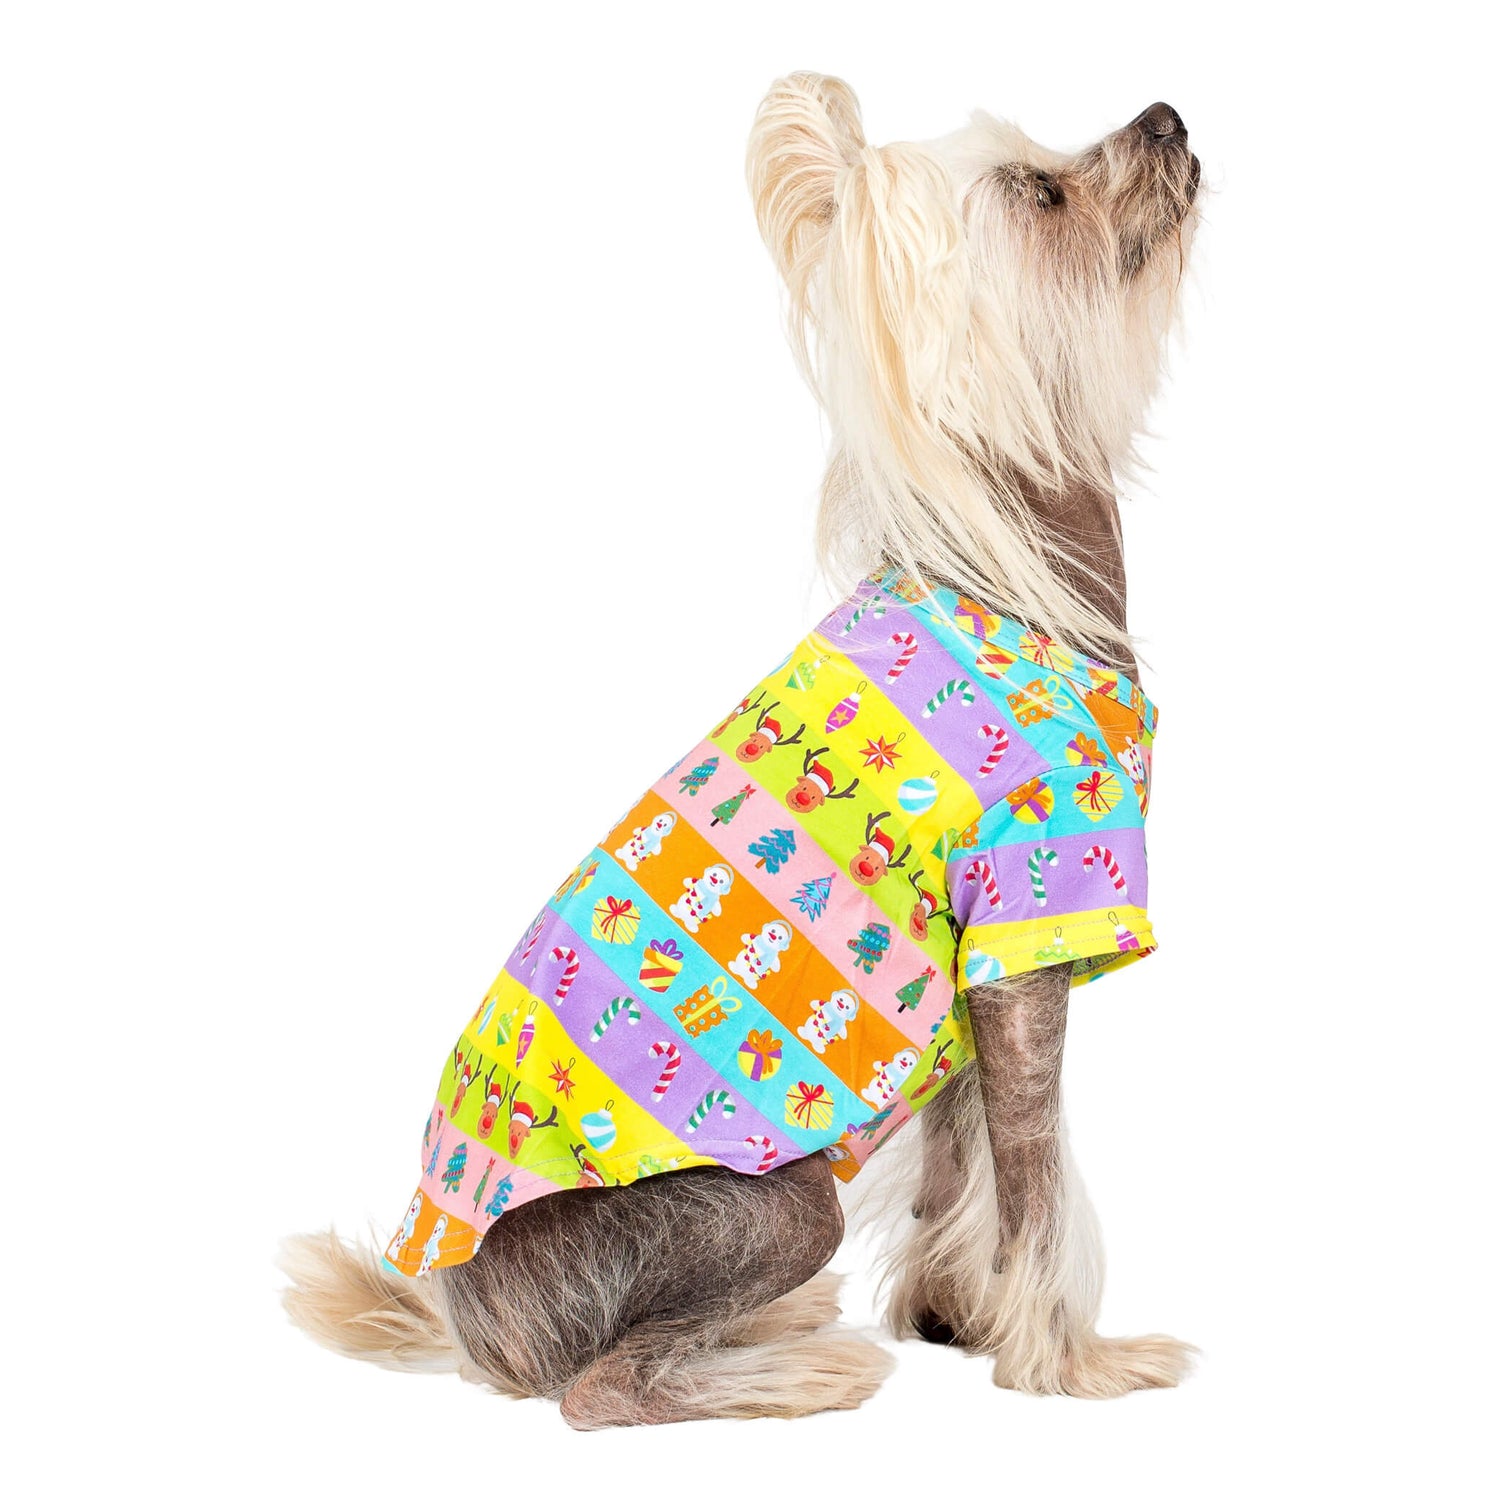 A Chinese Crested dog wearing VIbrant Hound's Electric Energy shirt for dogs. It is green, orange, pink, and purple stripes with reindeer, christmas trees, snowmen and christmas decorations printed on it.